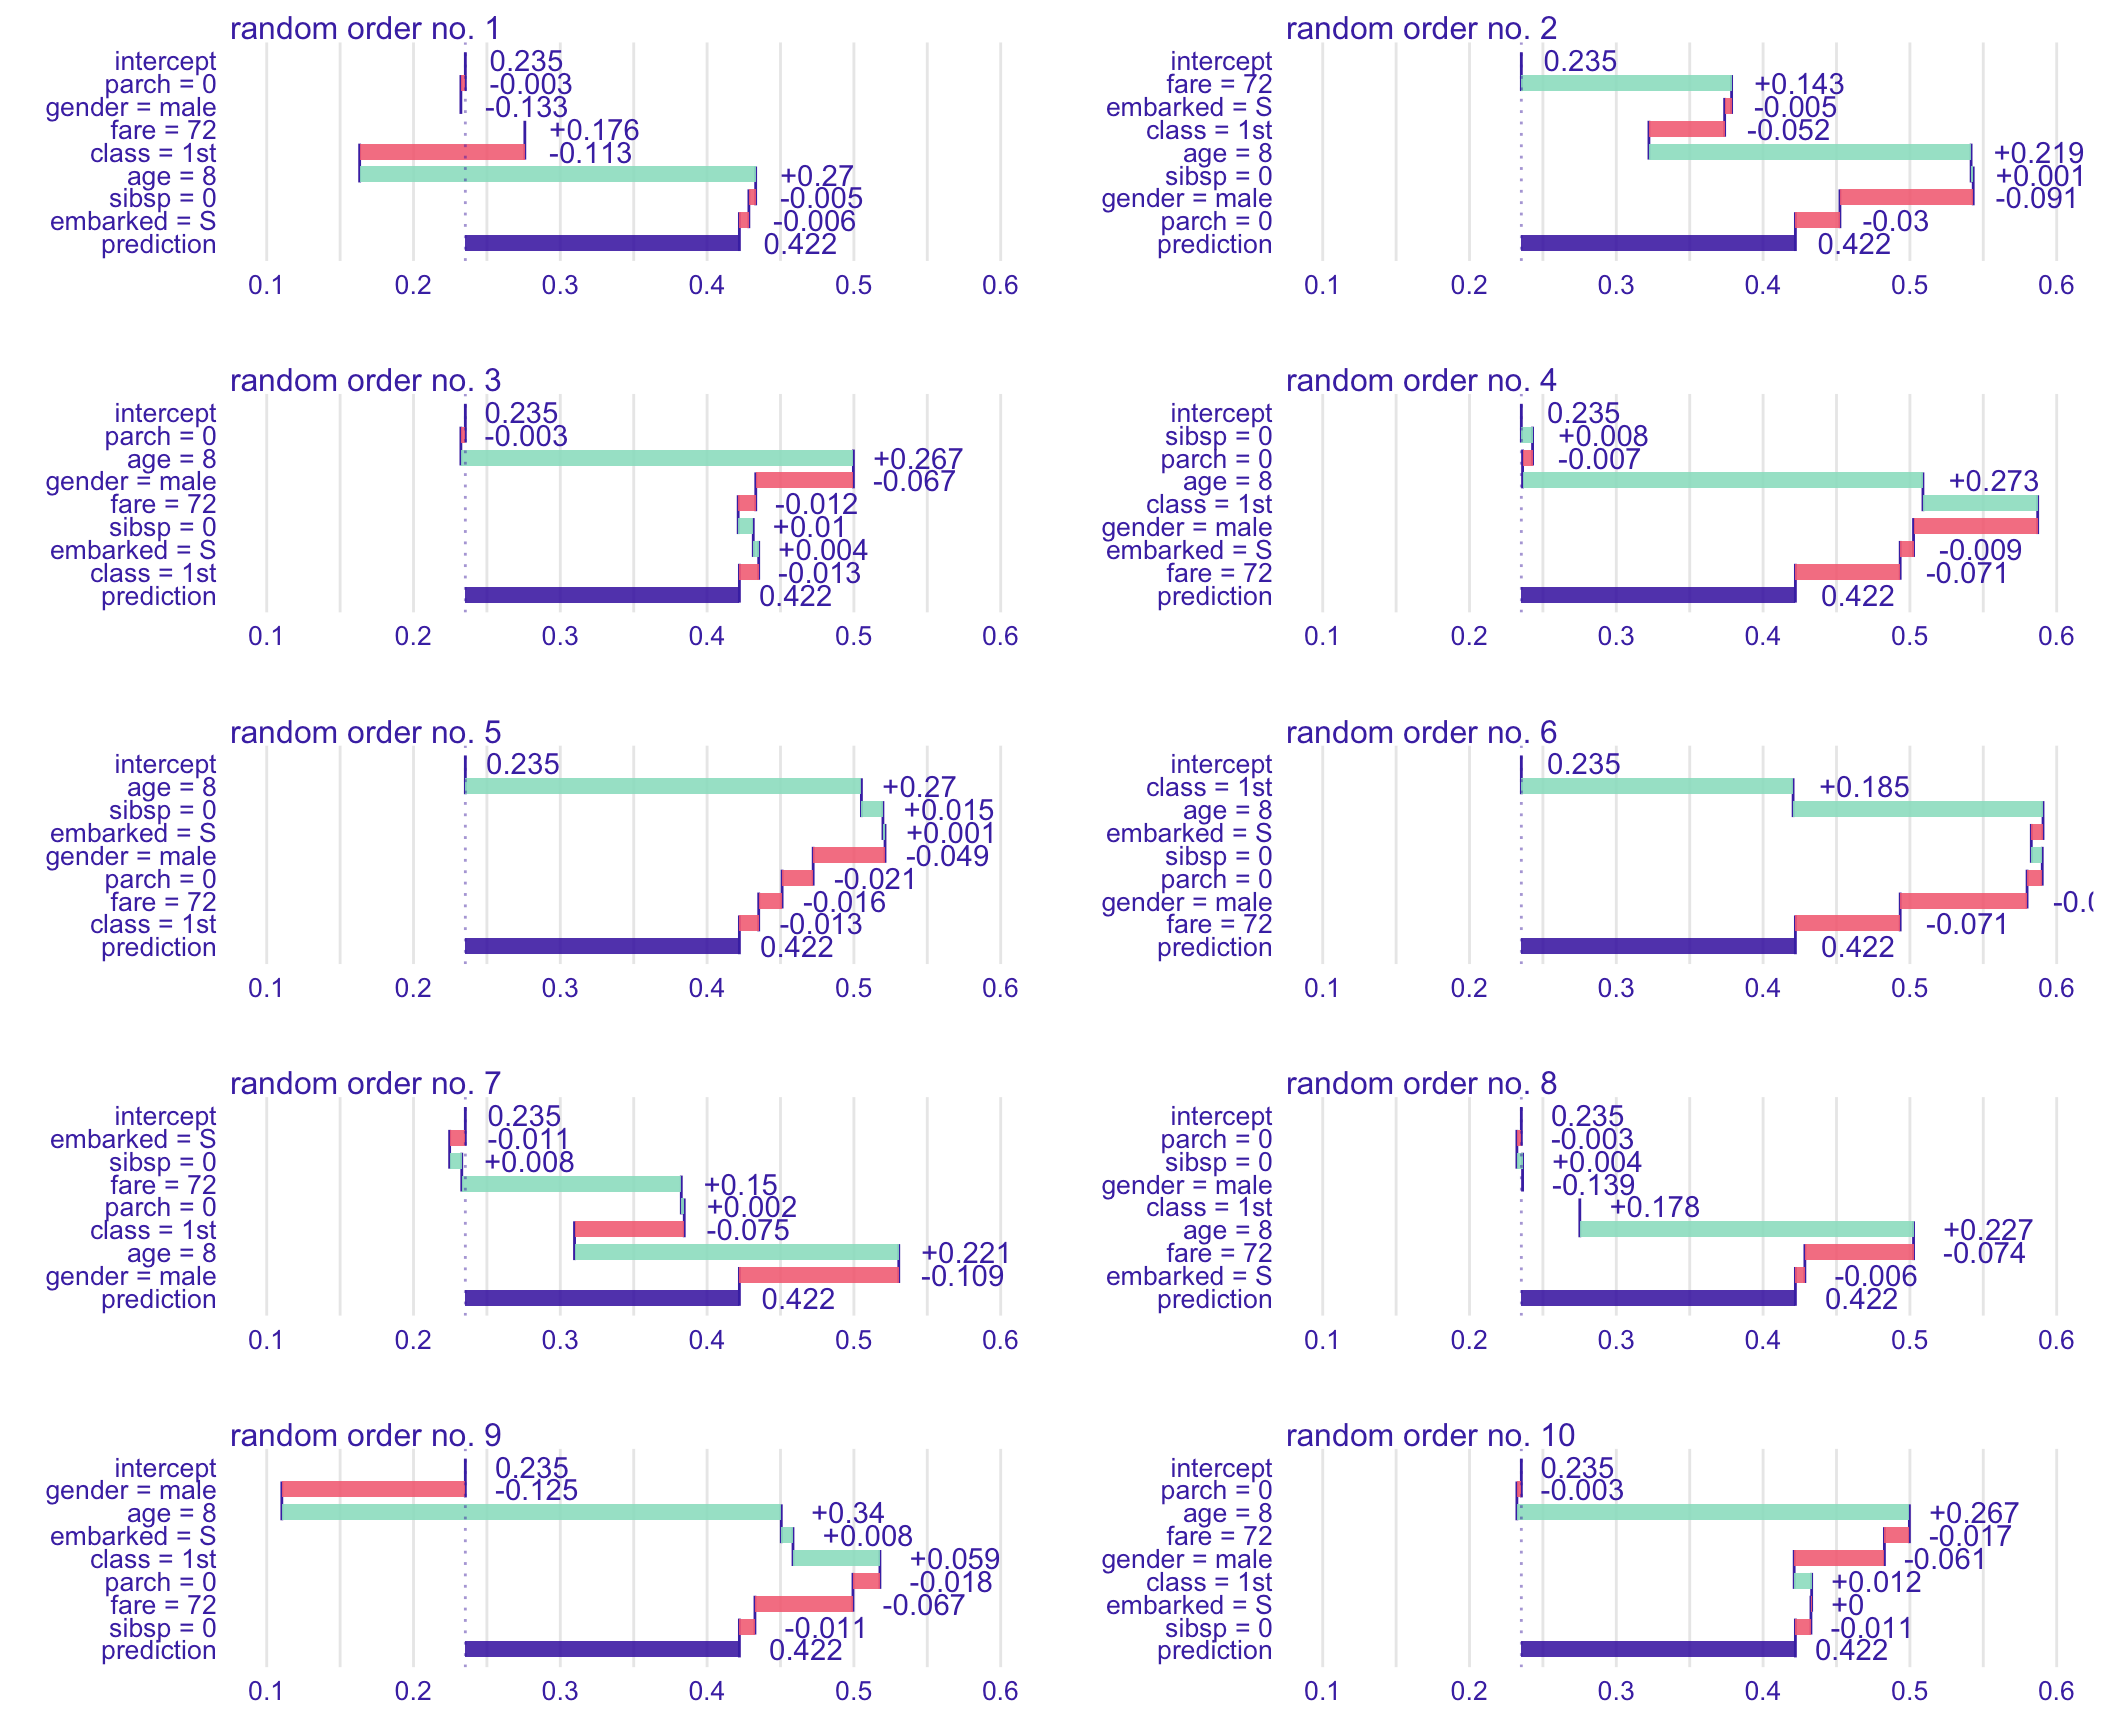 Break-down plots for 10 random orderings of explanatory variables for the prediction for Johnny D for the random forest model titanic_rf for the Titanic dataset. Each panel presents a single ordering, indicated by the order of the rows in the plot.